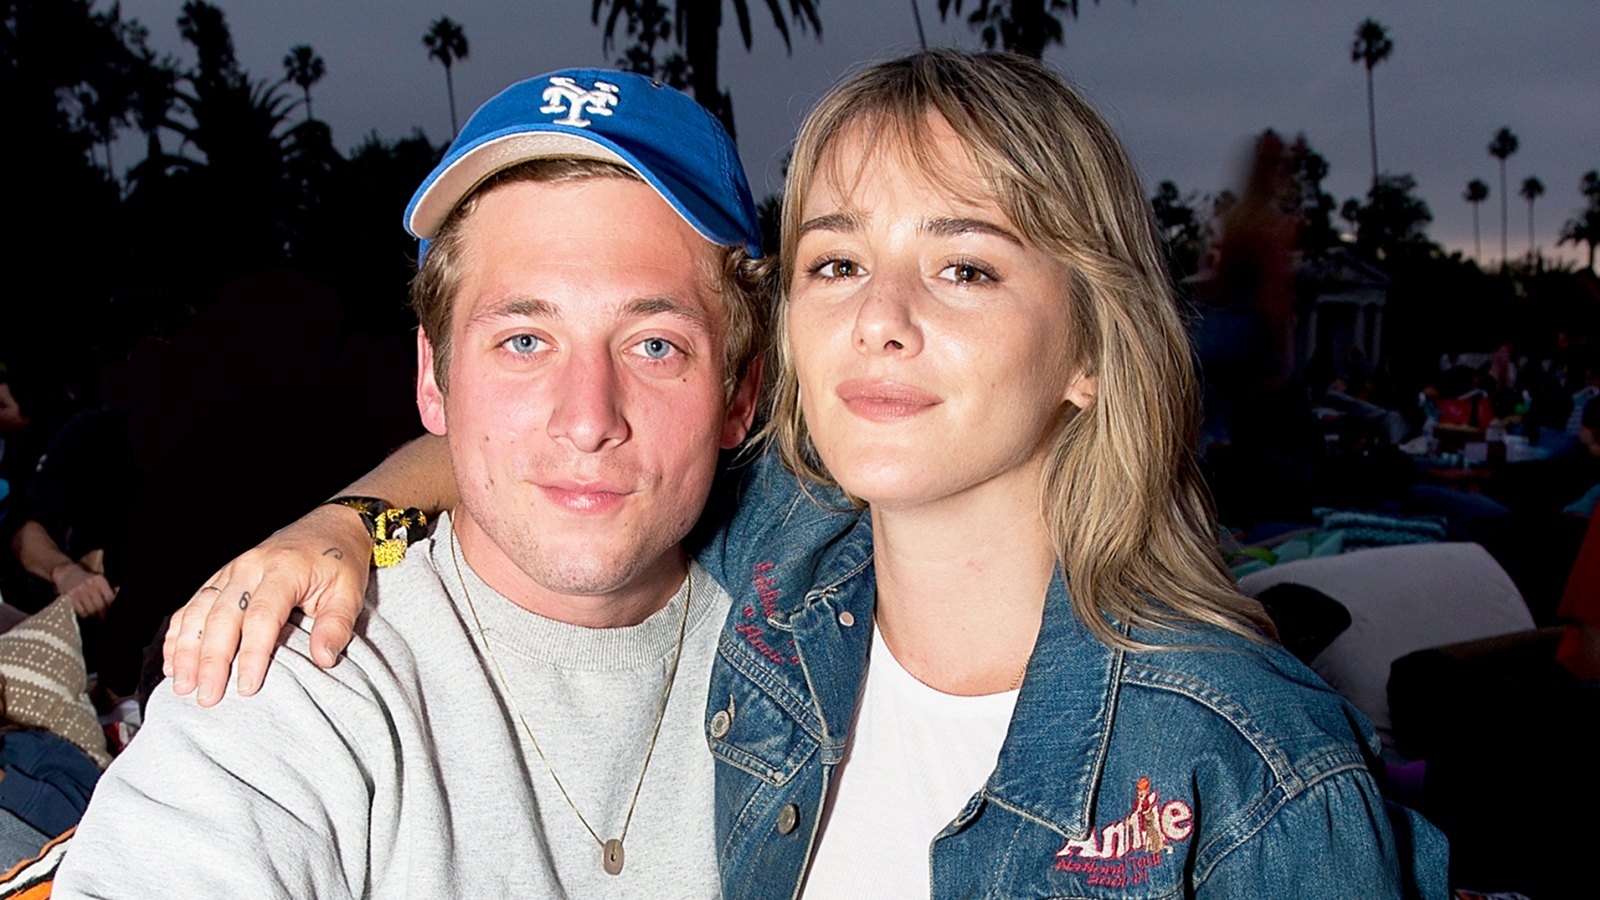 Jeremy Allen White and Addison Timlin attend 2017 Cinespia's screening at Hollywood Forever in Hollywood, California.